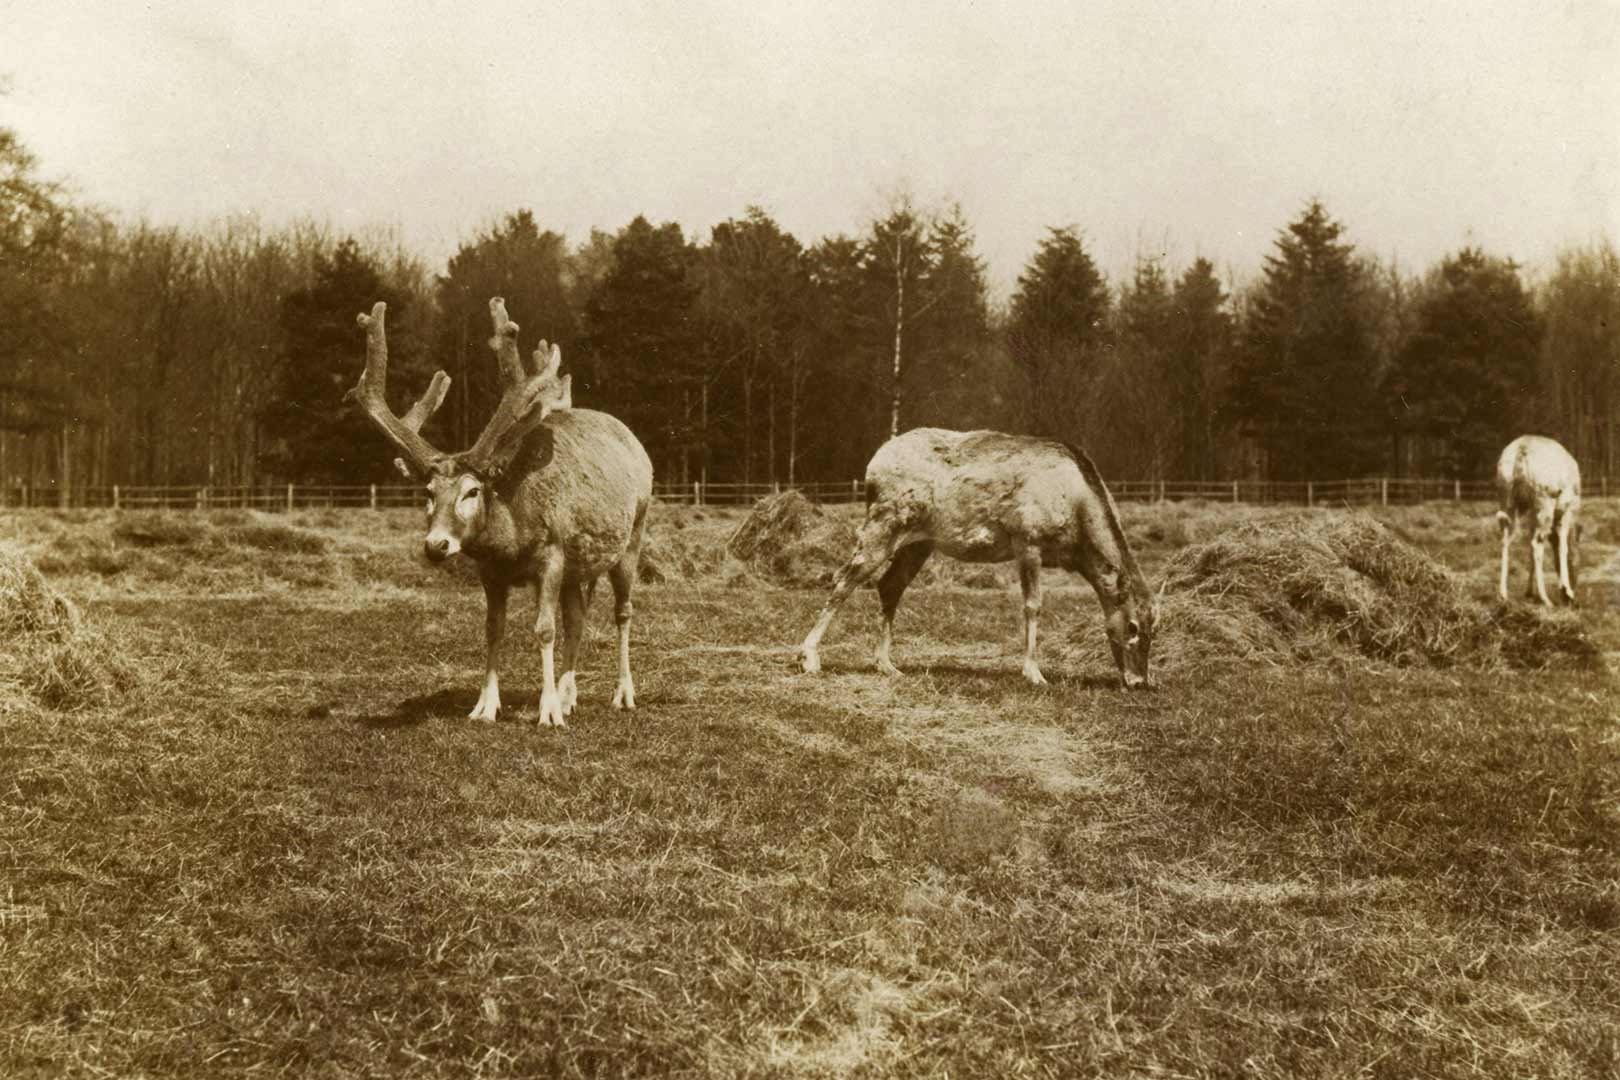 A picture of Pere David deer. Photo courtesy of Woburn Abbey Collection.